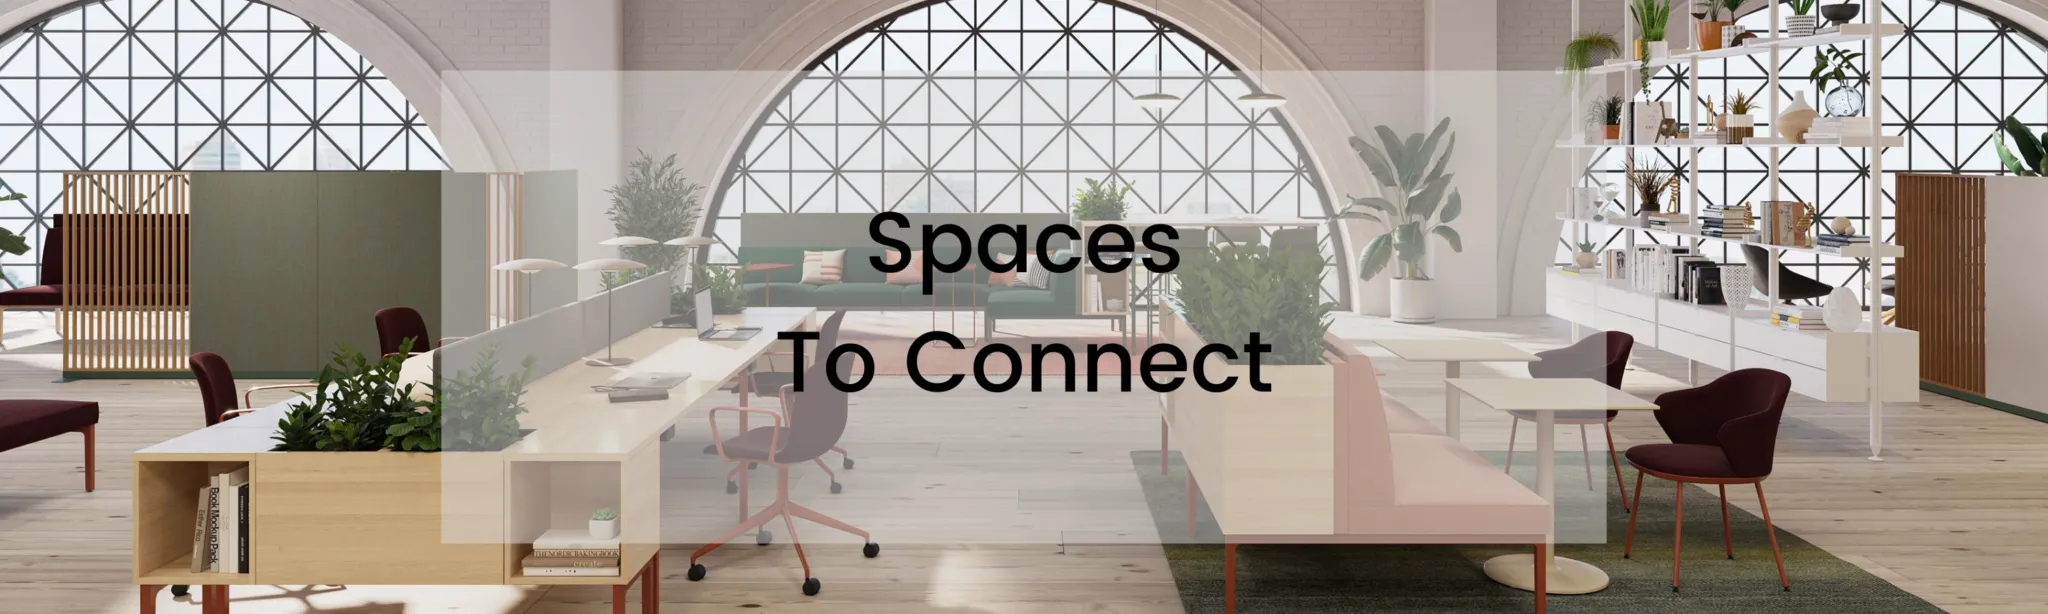 Newer-Interiors-Spaces-Banner-1-2048x614